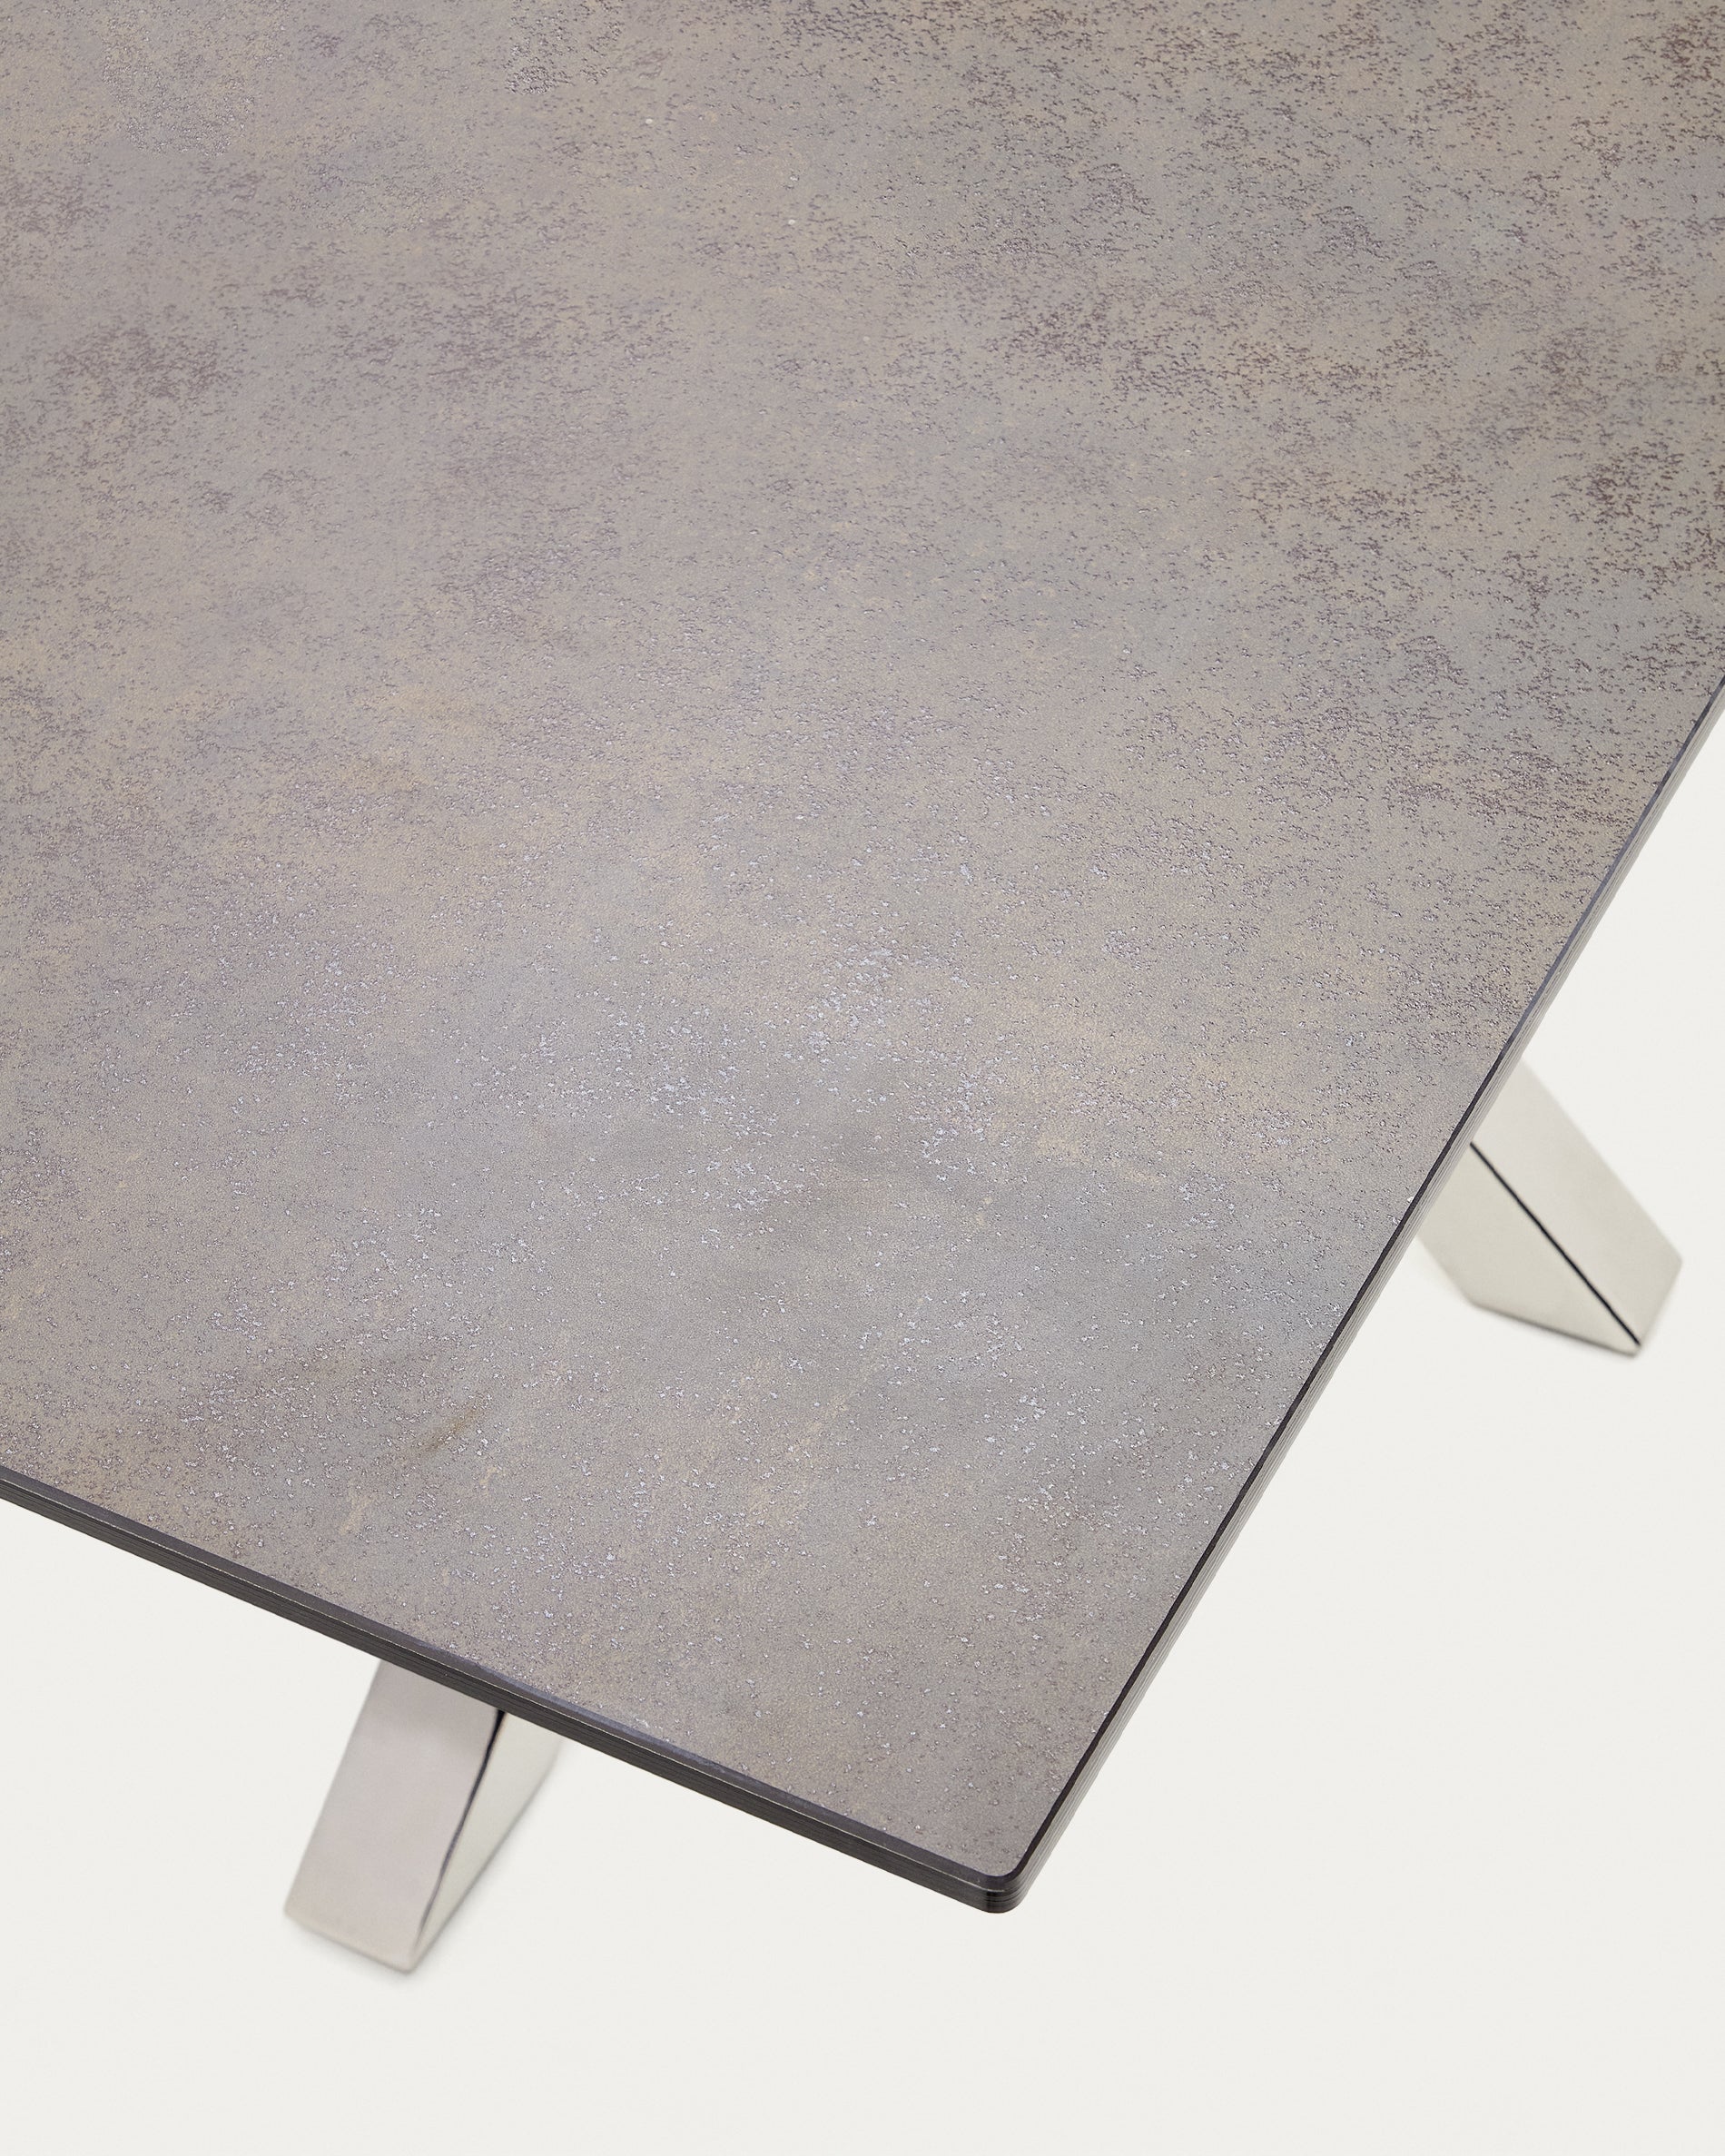 Argo table 200x100, Stainless Steel Porcelain Iron Moss